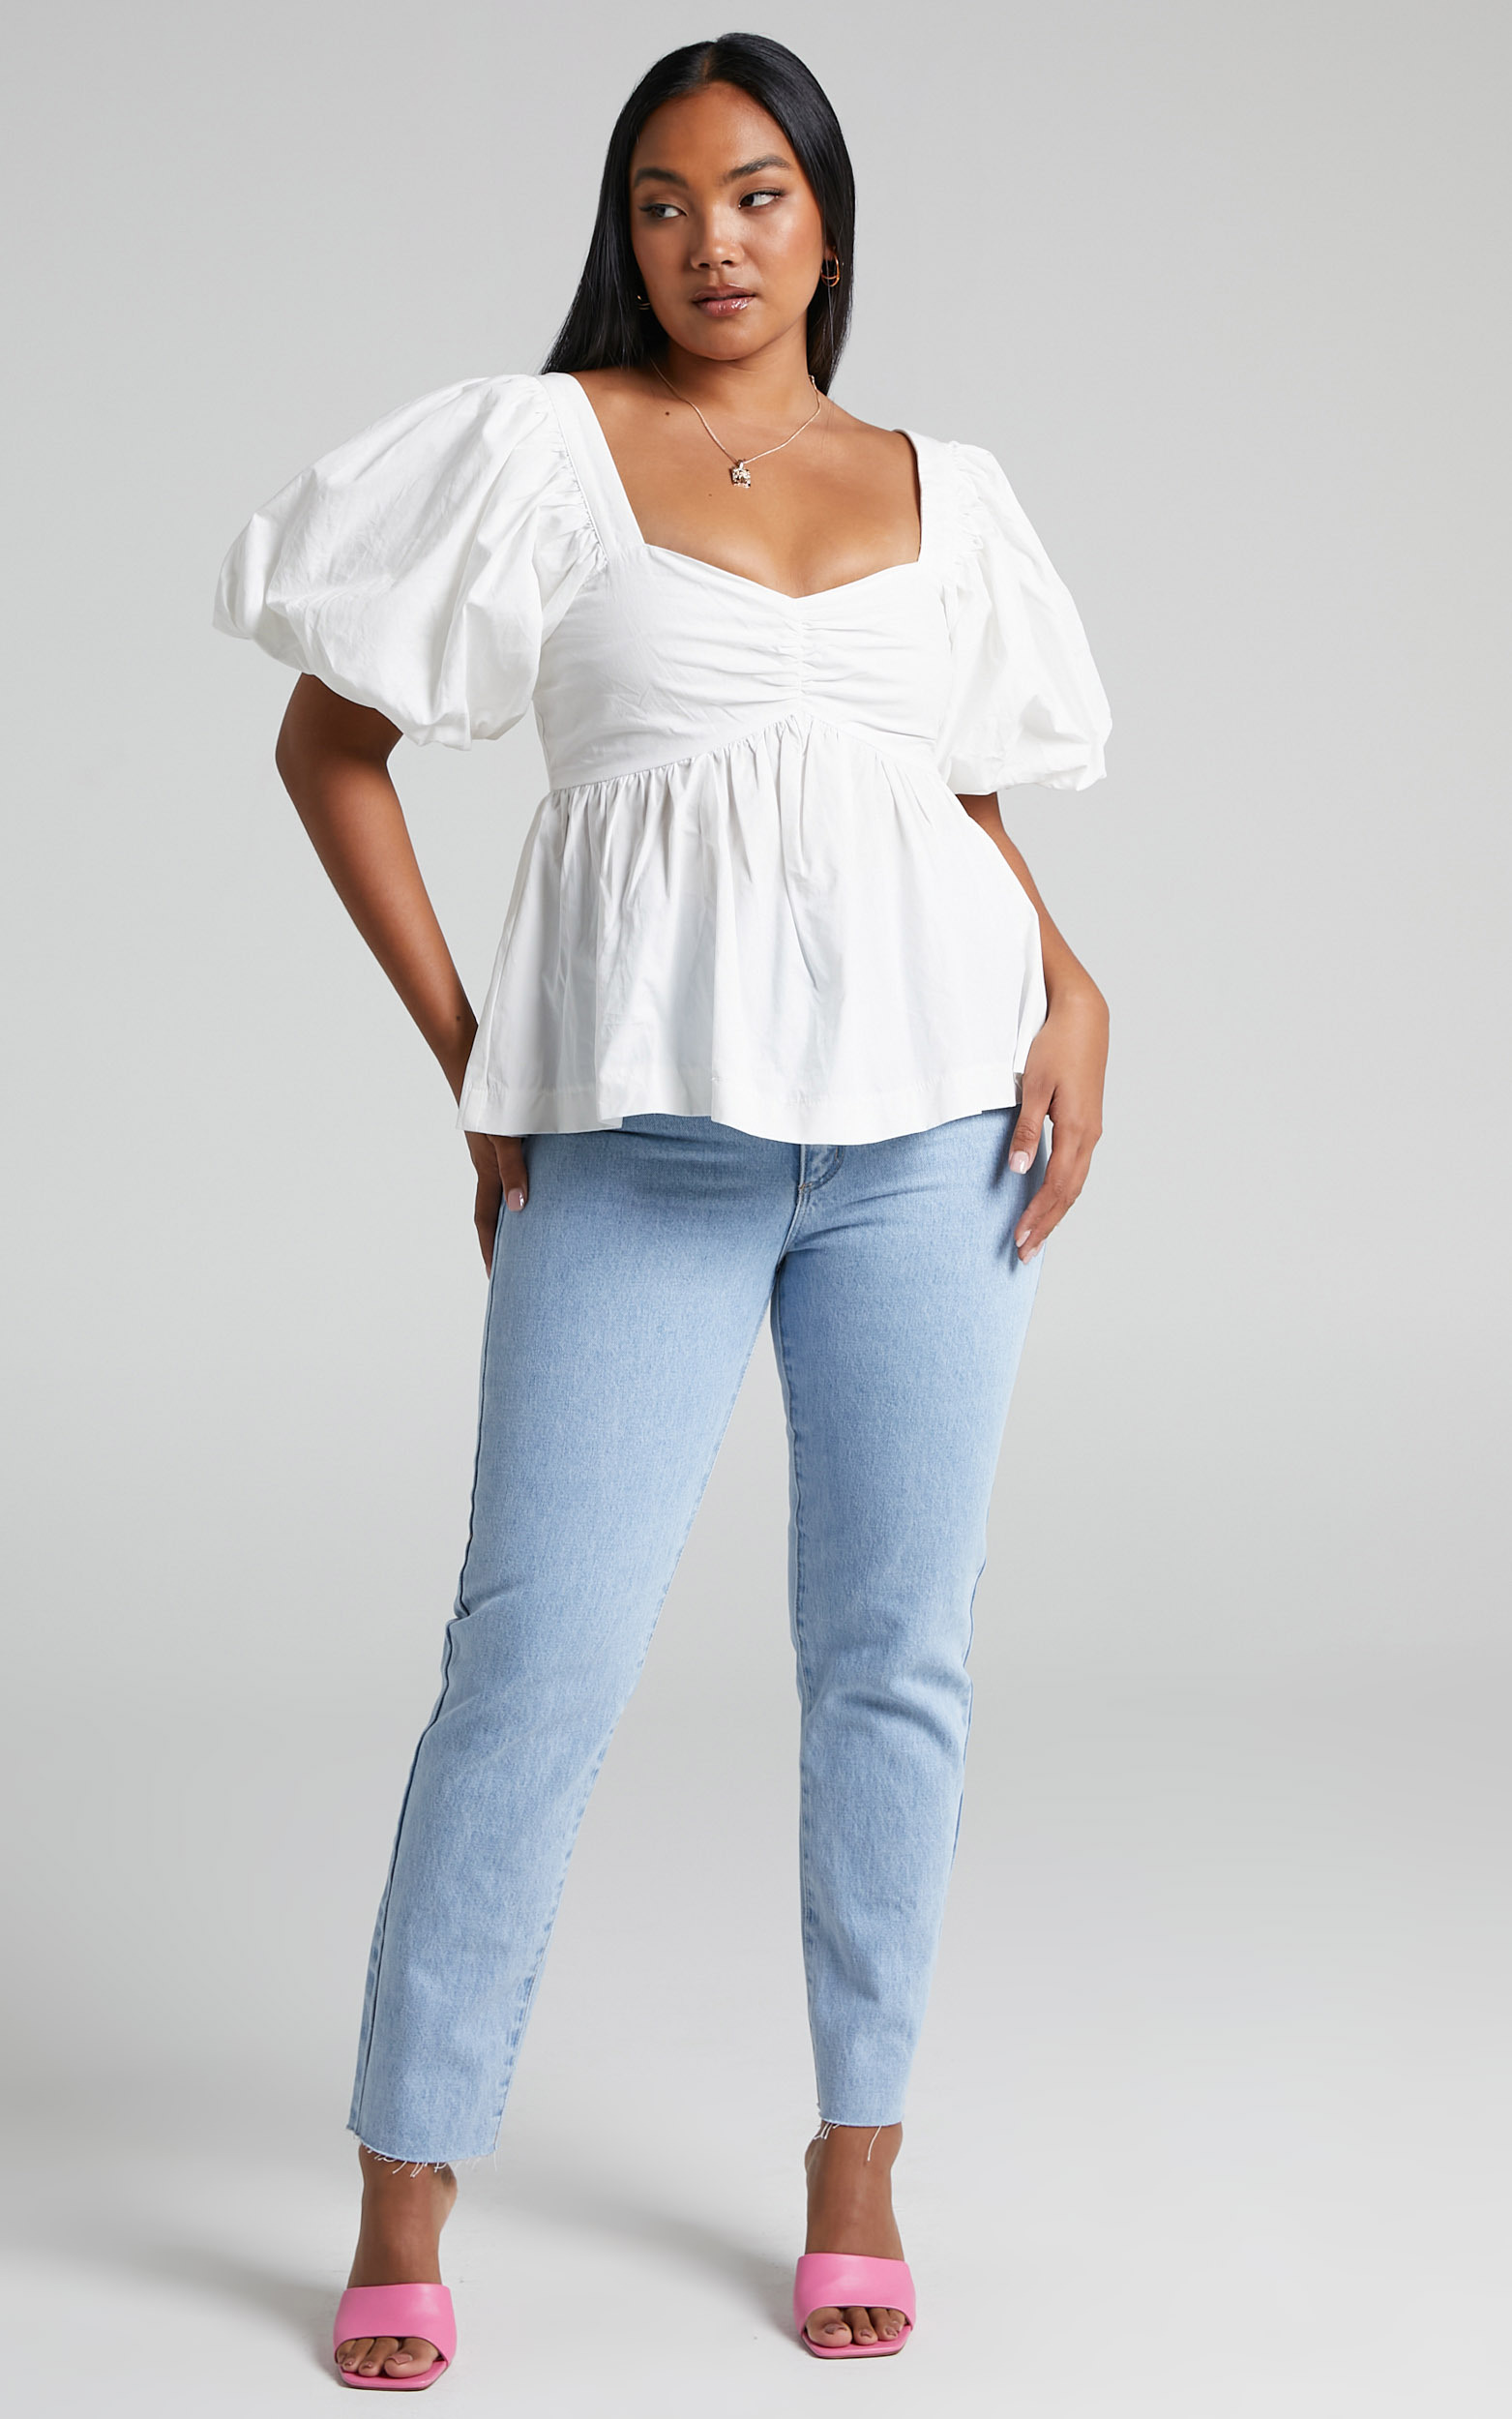 Shanskie Puff Sleeve Peplum Top in Off White - 04, WHT1, hi-res image number null